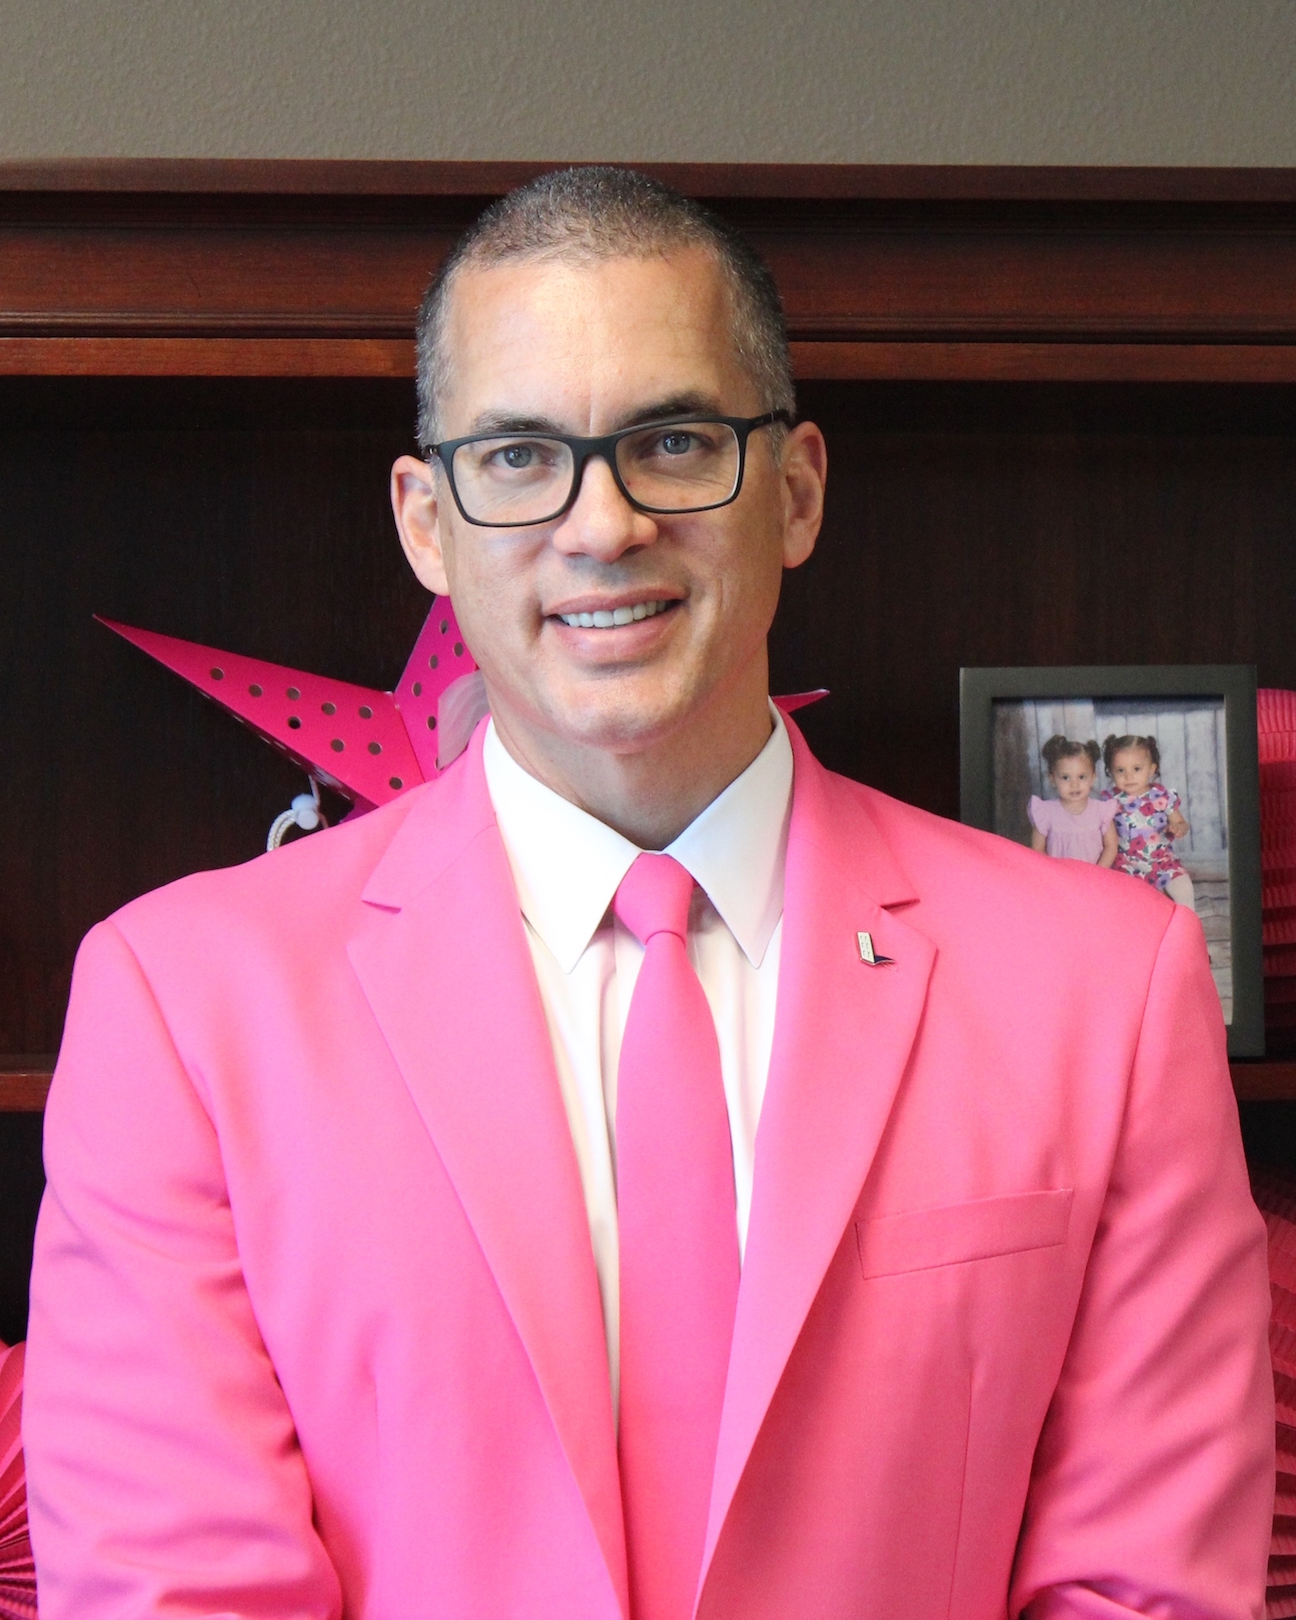 Craig Kirkland, executive vice president at Nevada State Bank, raised more than $6,000 last month to help fight breast cancer.